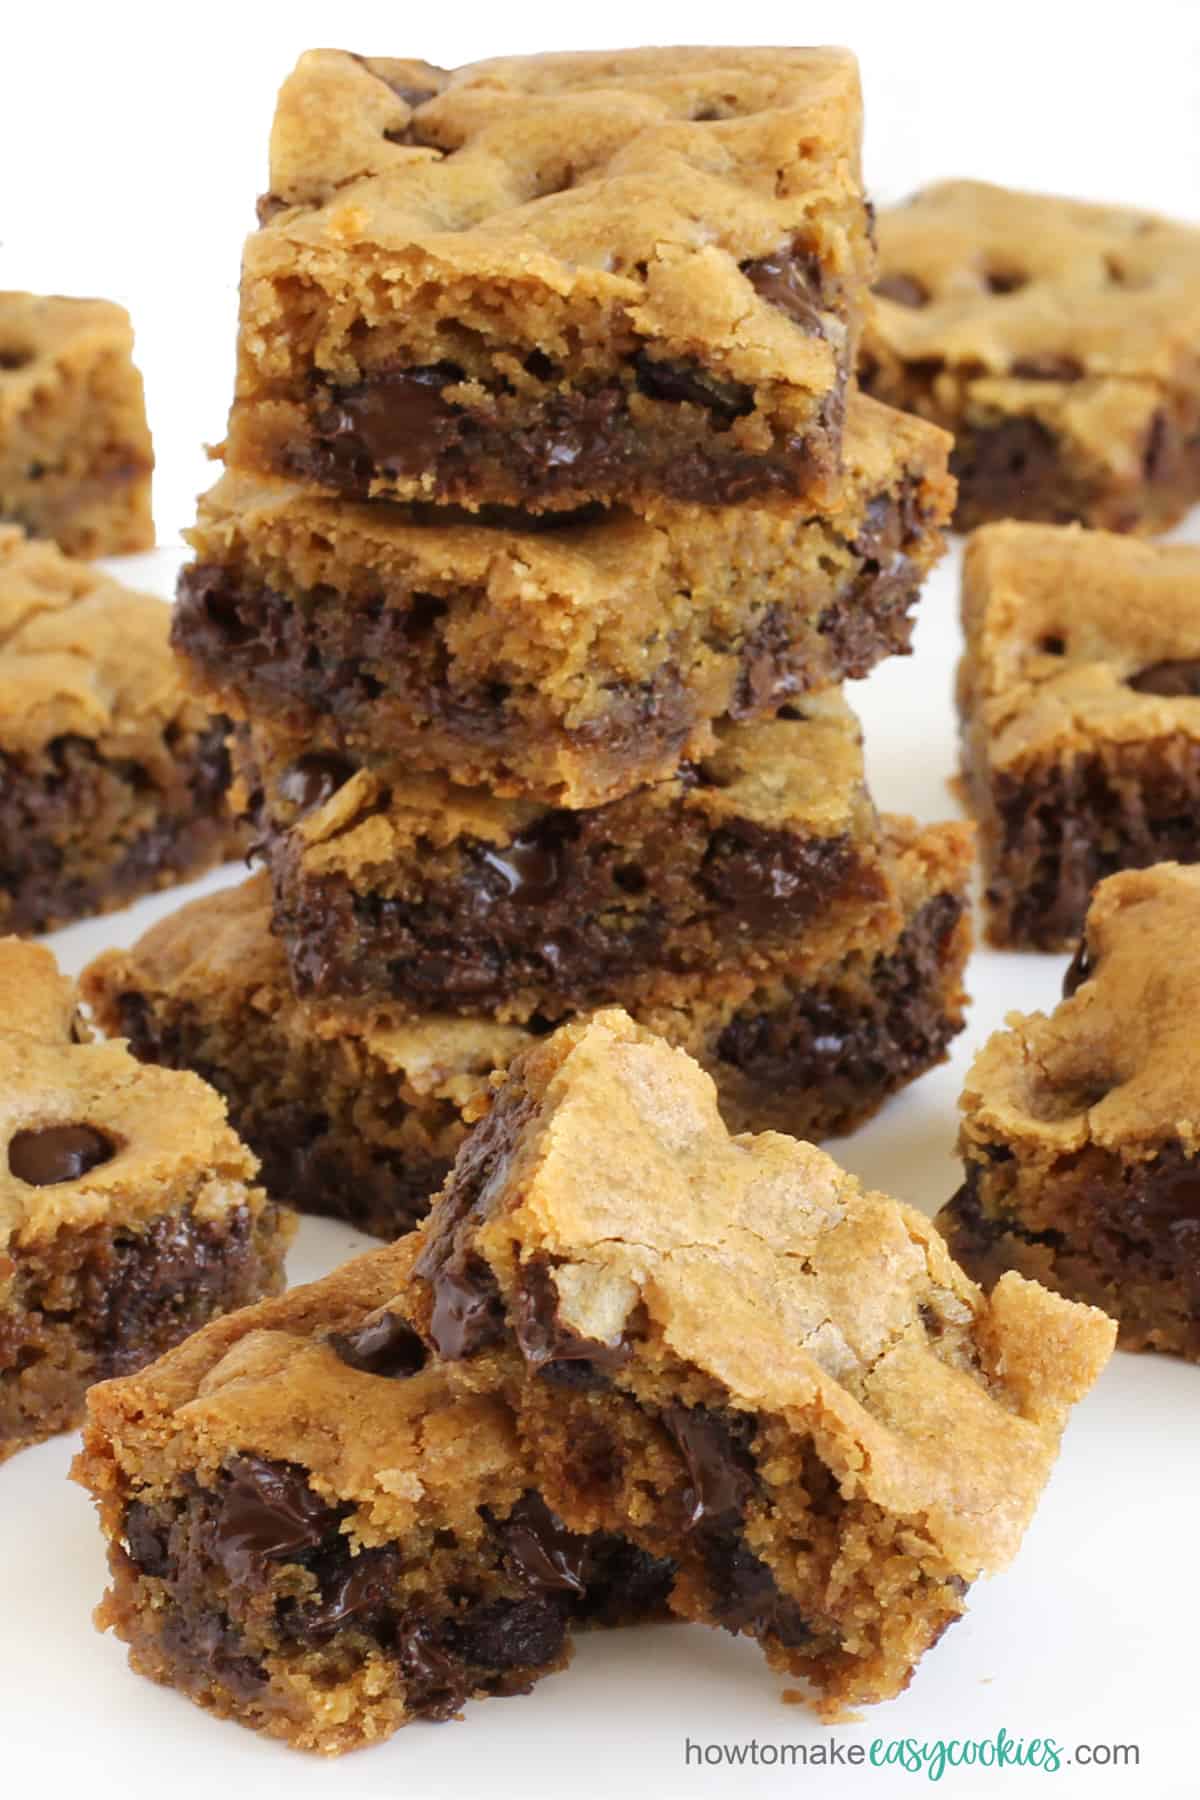 warm chocolate chip cookie bars right out of the oven have gooey melted chips inside